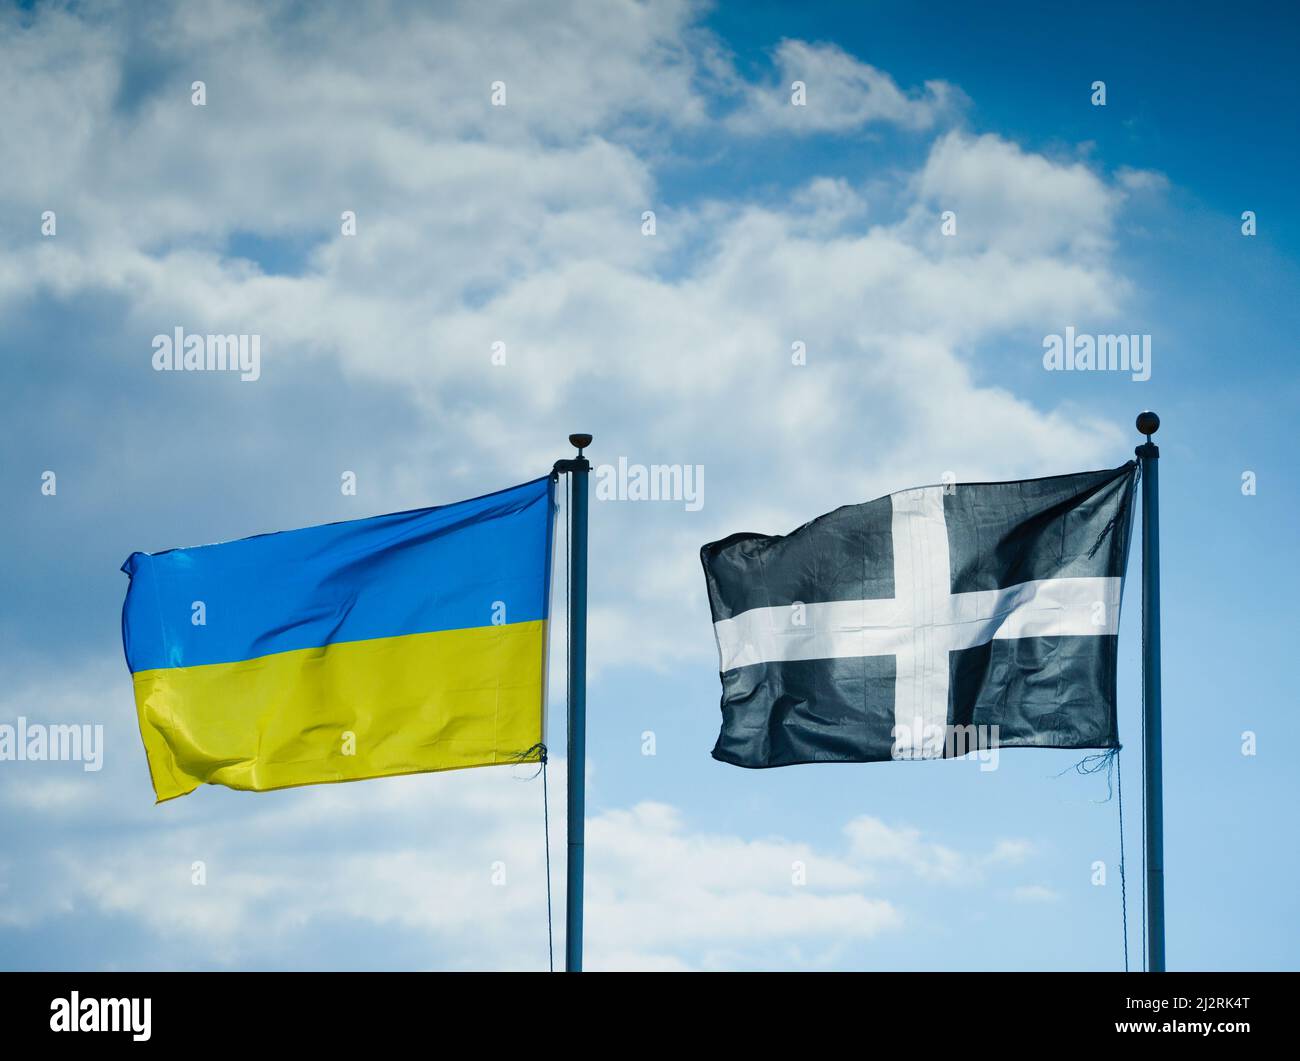 The flag of Ukraine flys next to the Cornish St. Piran's flag against a cloudy blue sky. People of Cornwall in solidarity with the people of Ukraine. Stock Photo